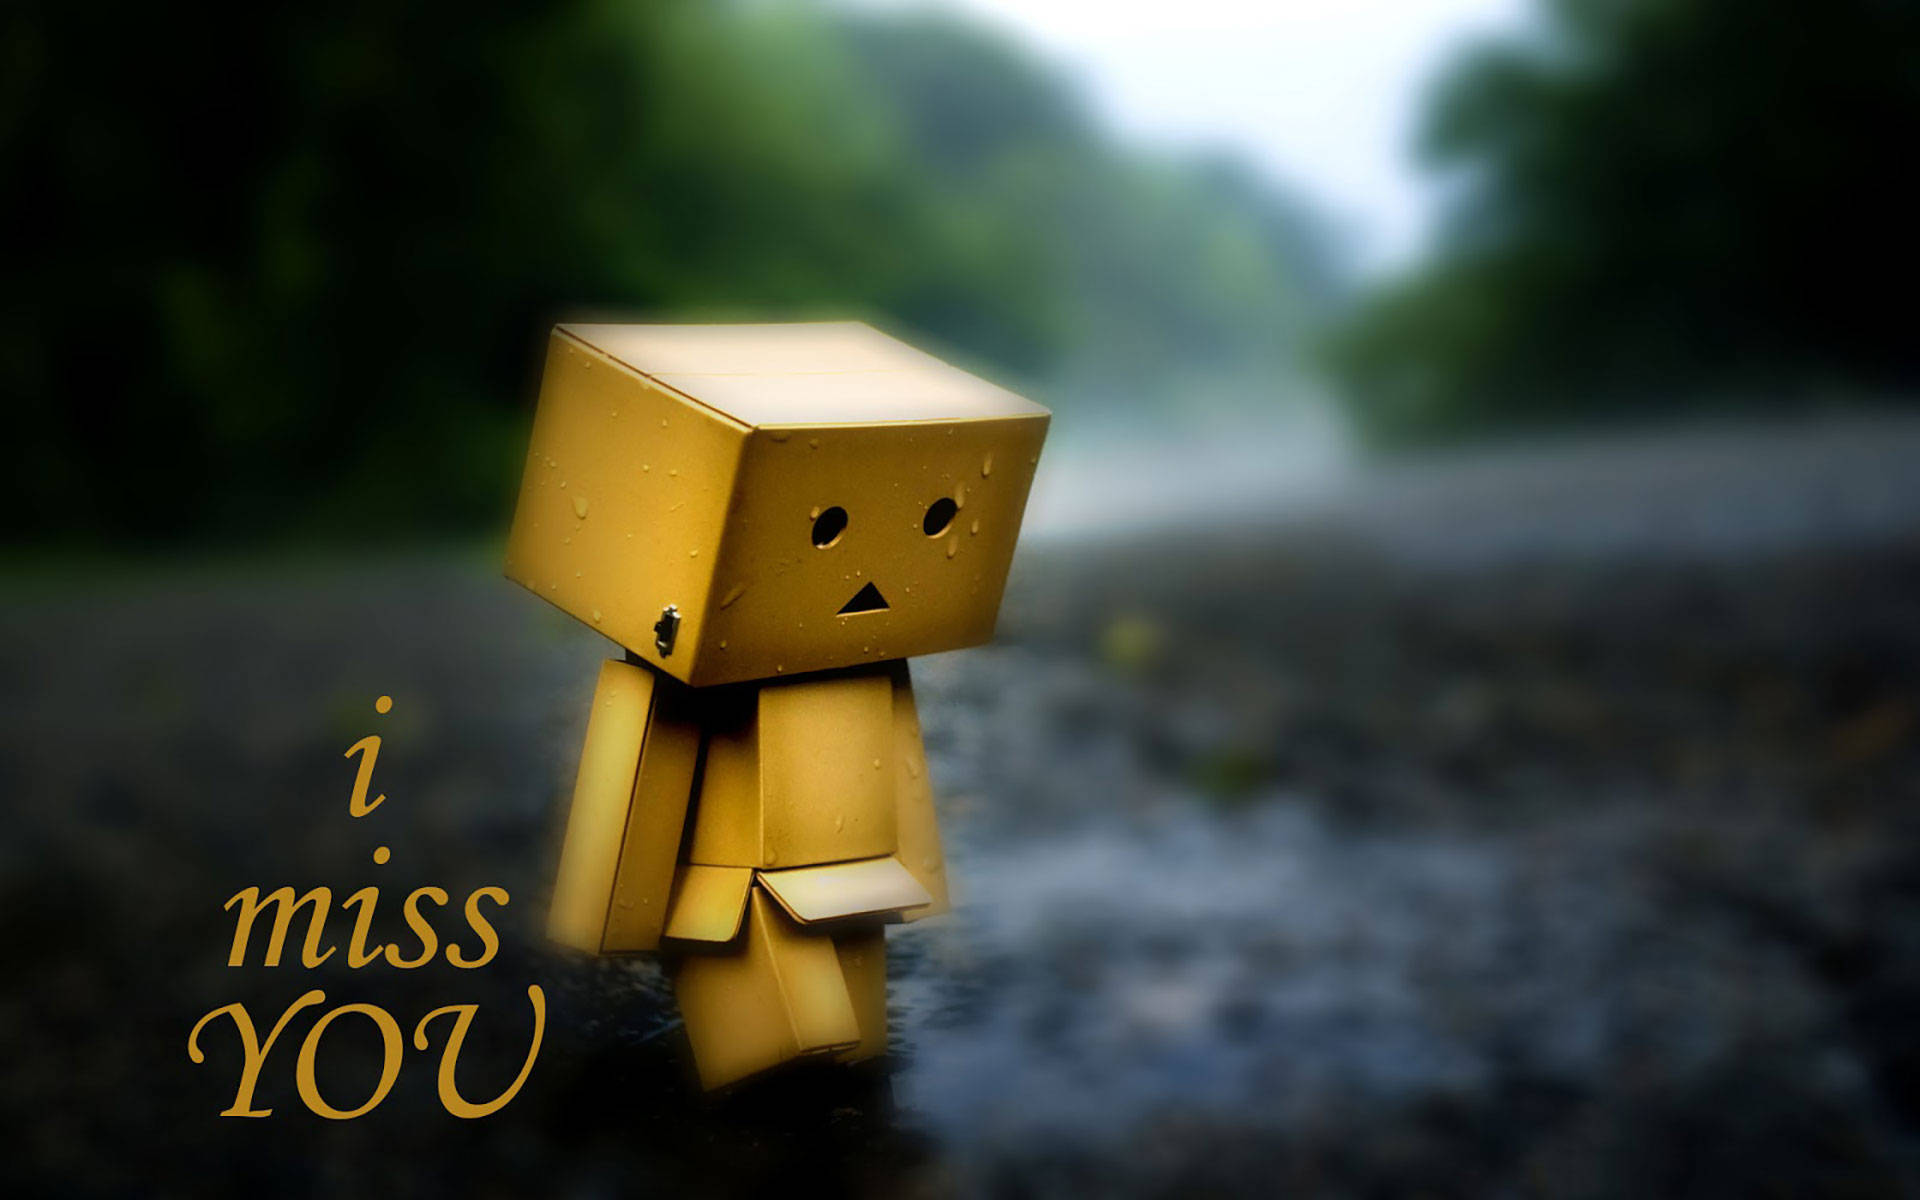 Download Missing You Box Toy Wallpaper 